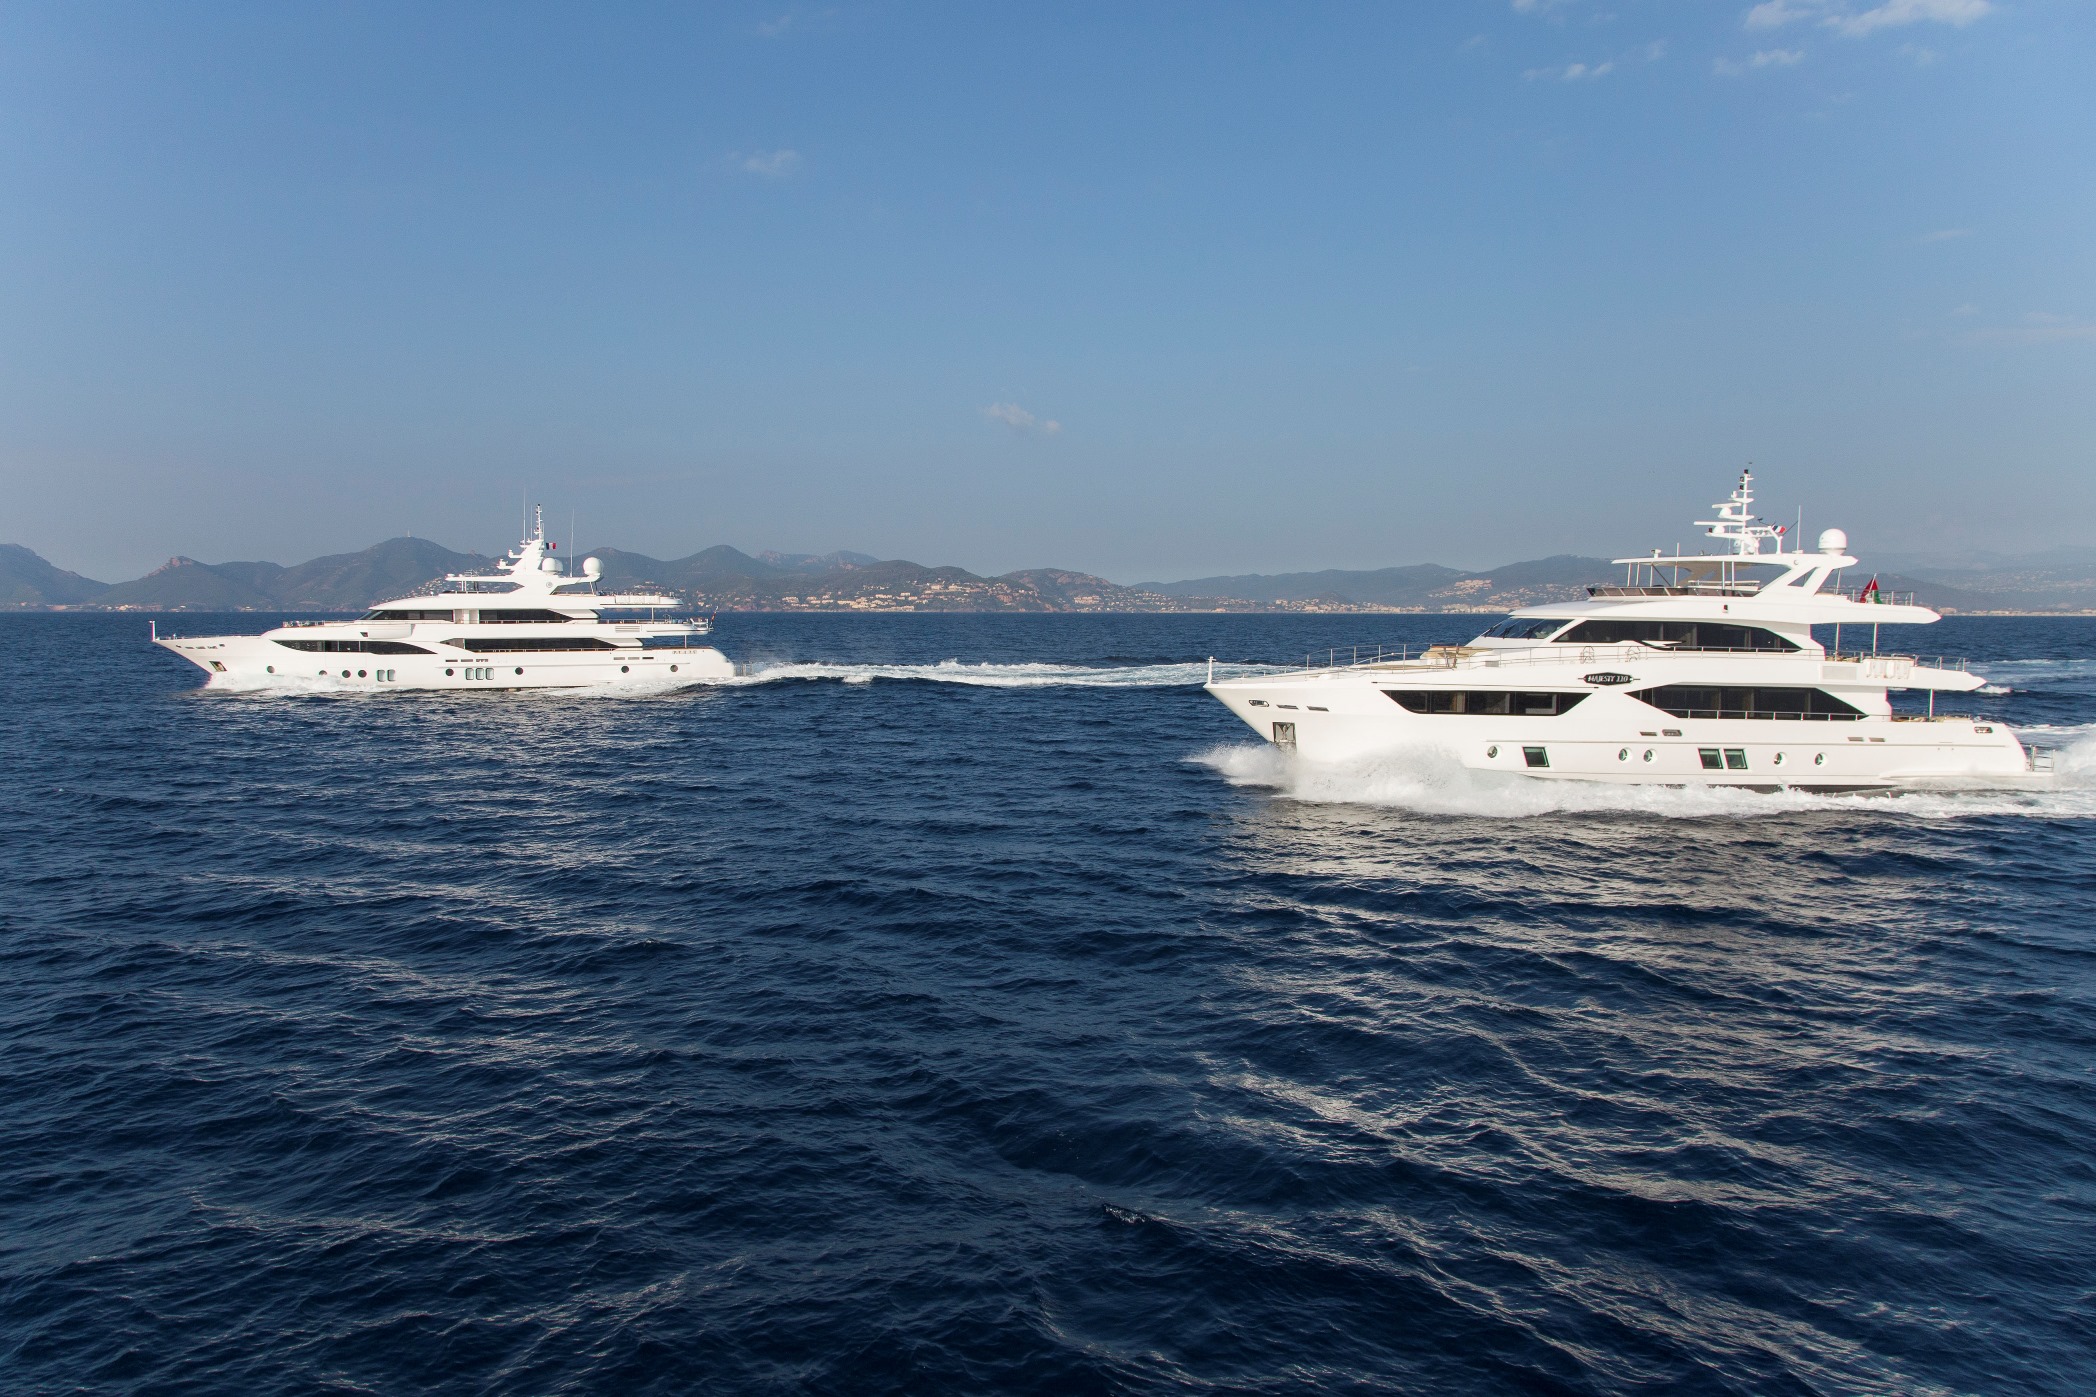 Majesty 155 and Majesty 110 in Cannes, France 001.jpg